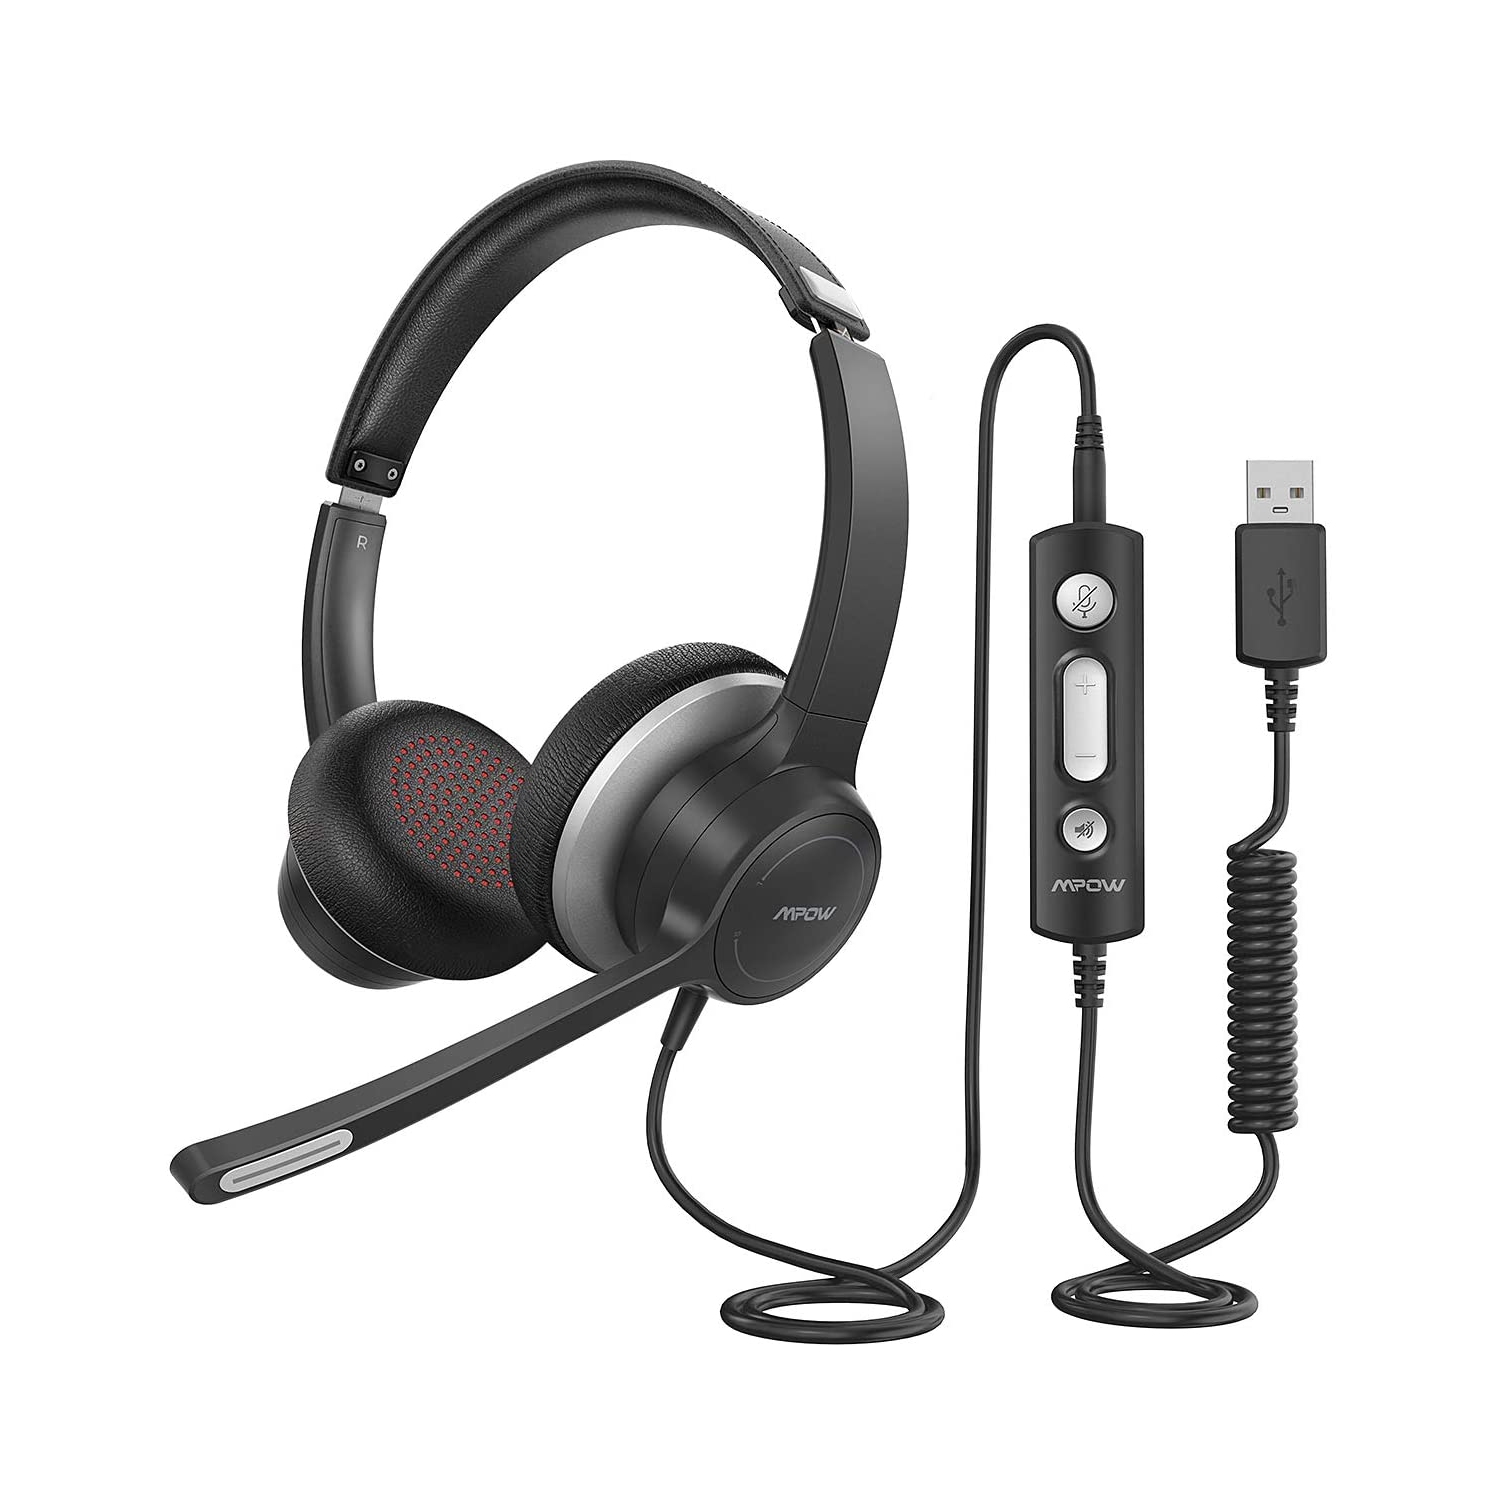 Mpow HC6 USB Headset with Microphone, Comfort-fit Office Computer Headphone, On-Ear 3.5mm Jack Call Center Headset